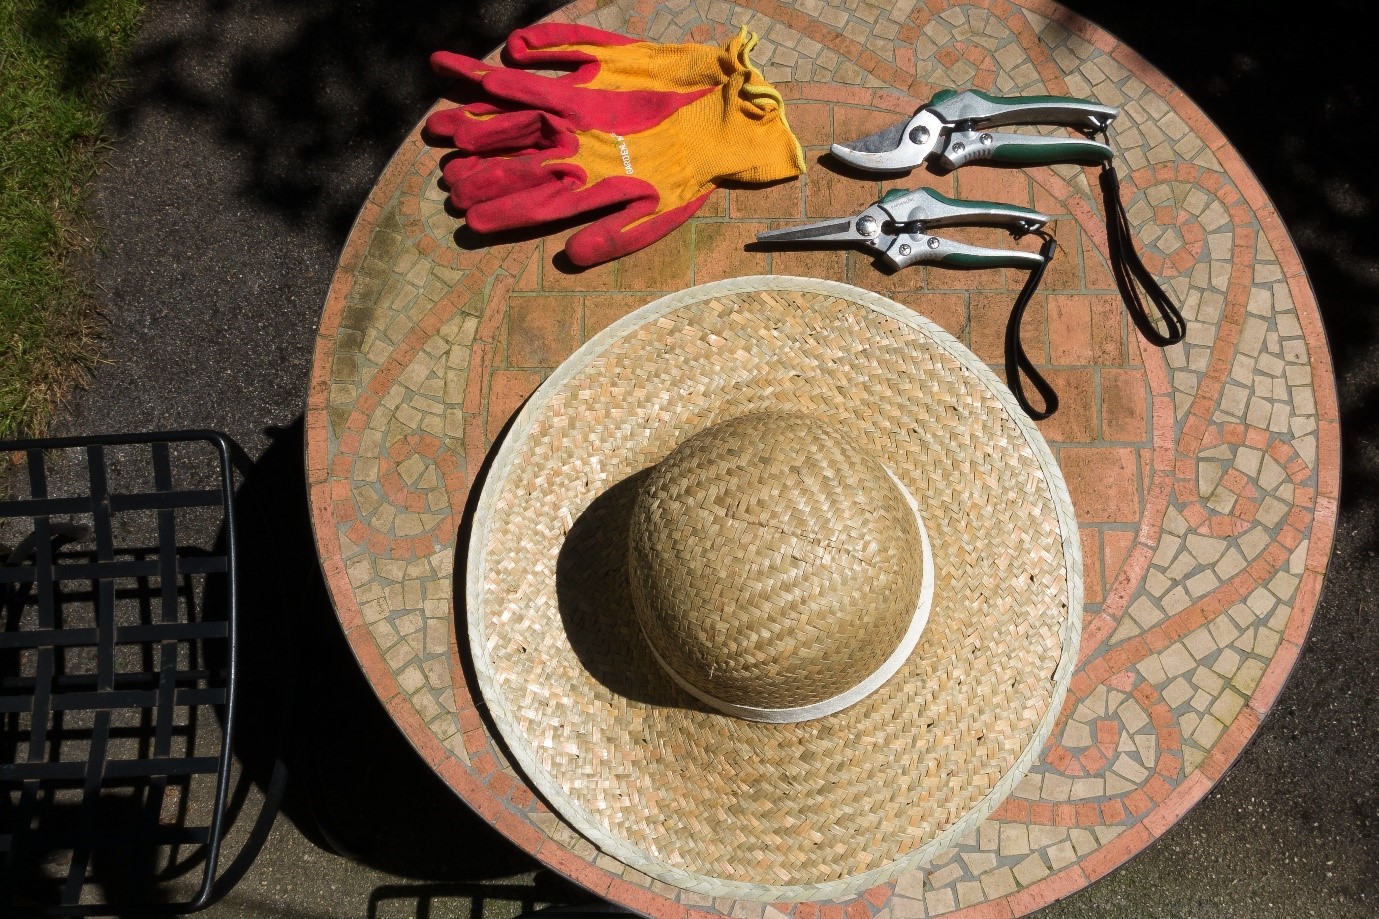 Straw hat, gardening gloves and scissors on mosaic table 